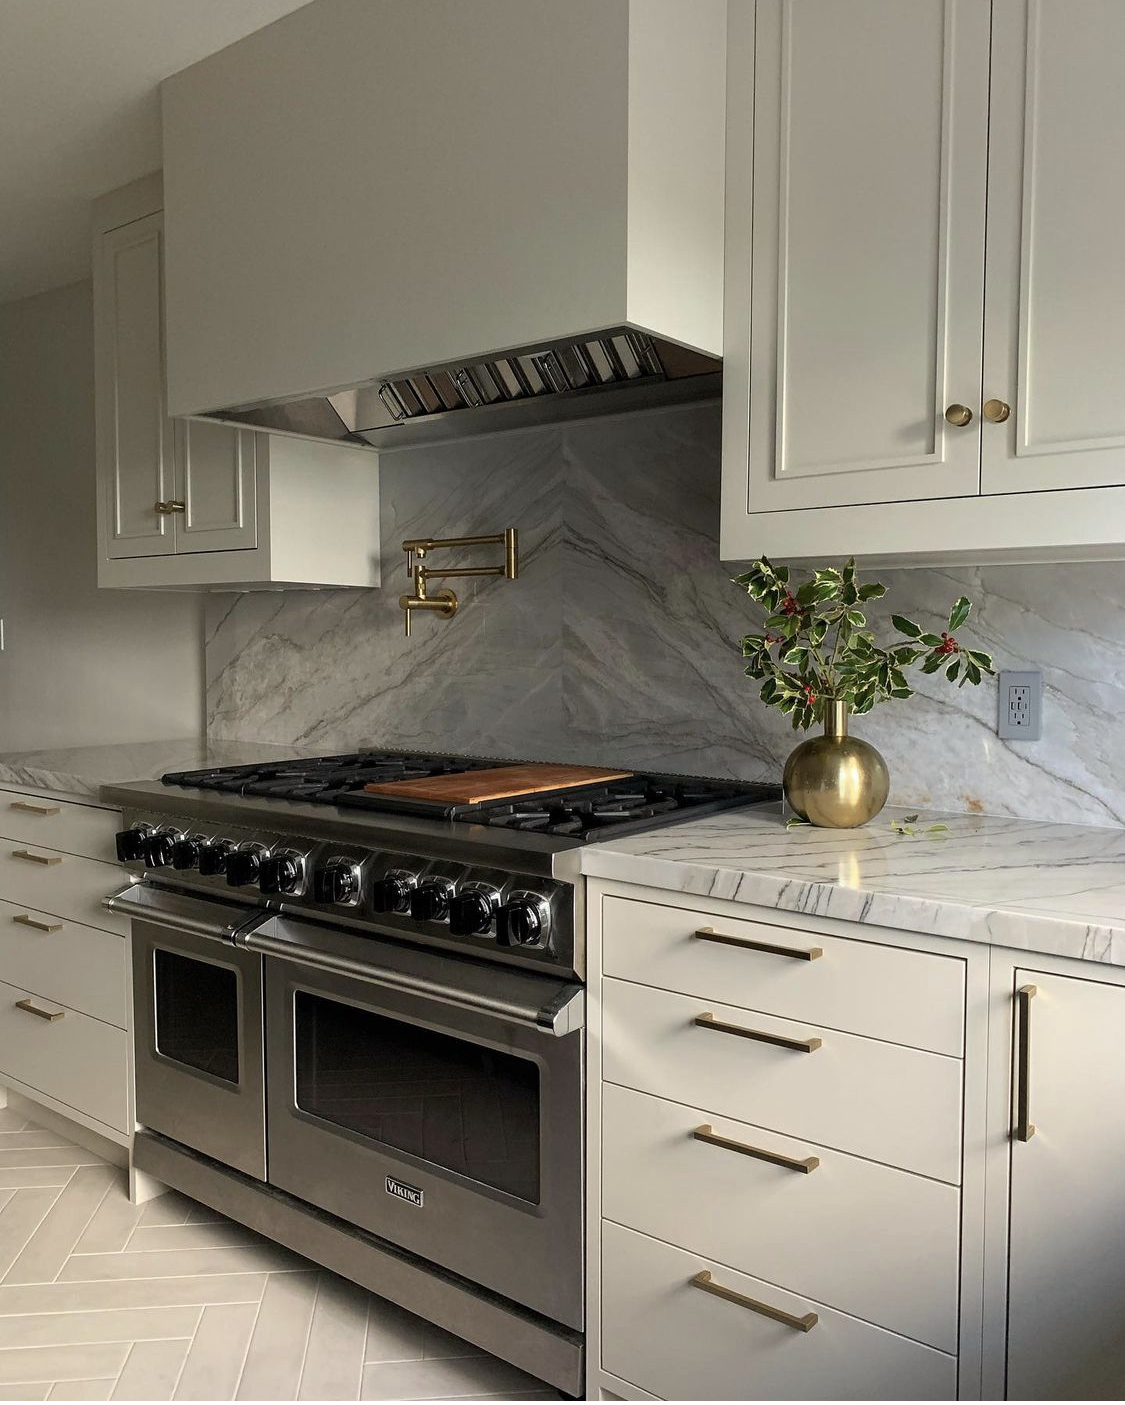 Viking Range and Hood Featured in Remodelista Article - Viking